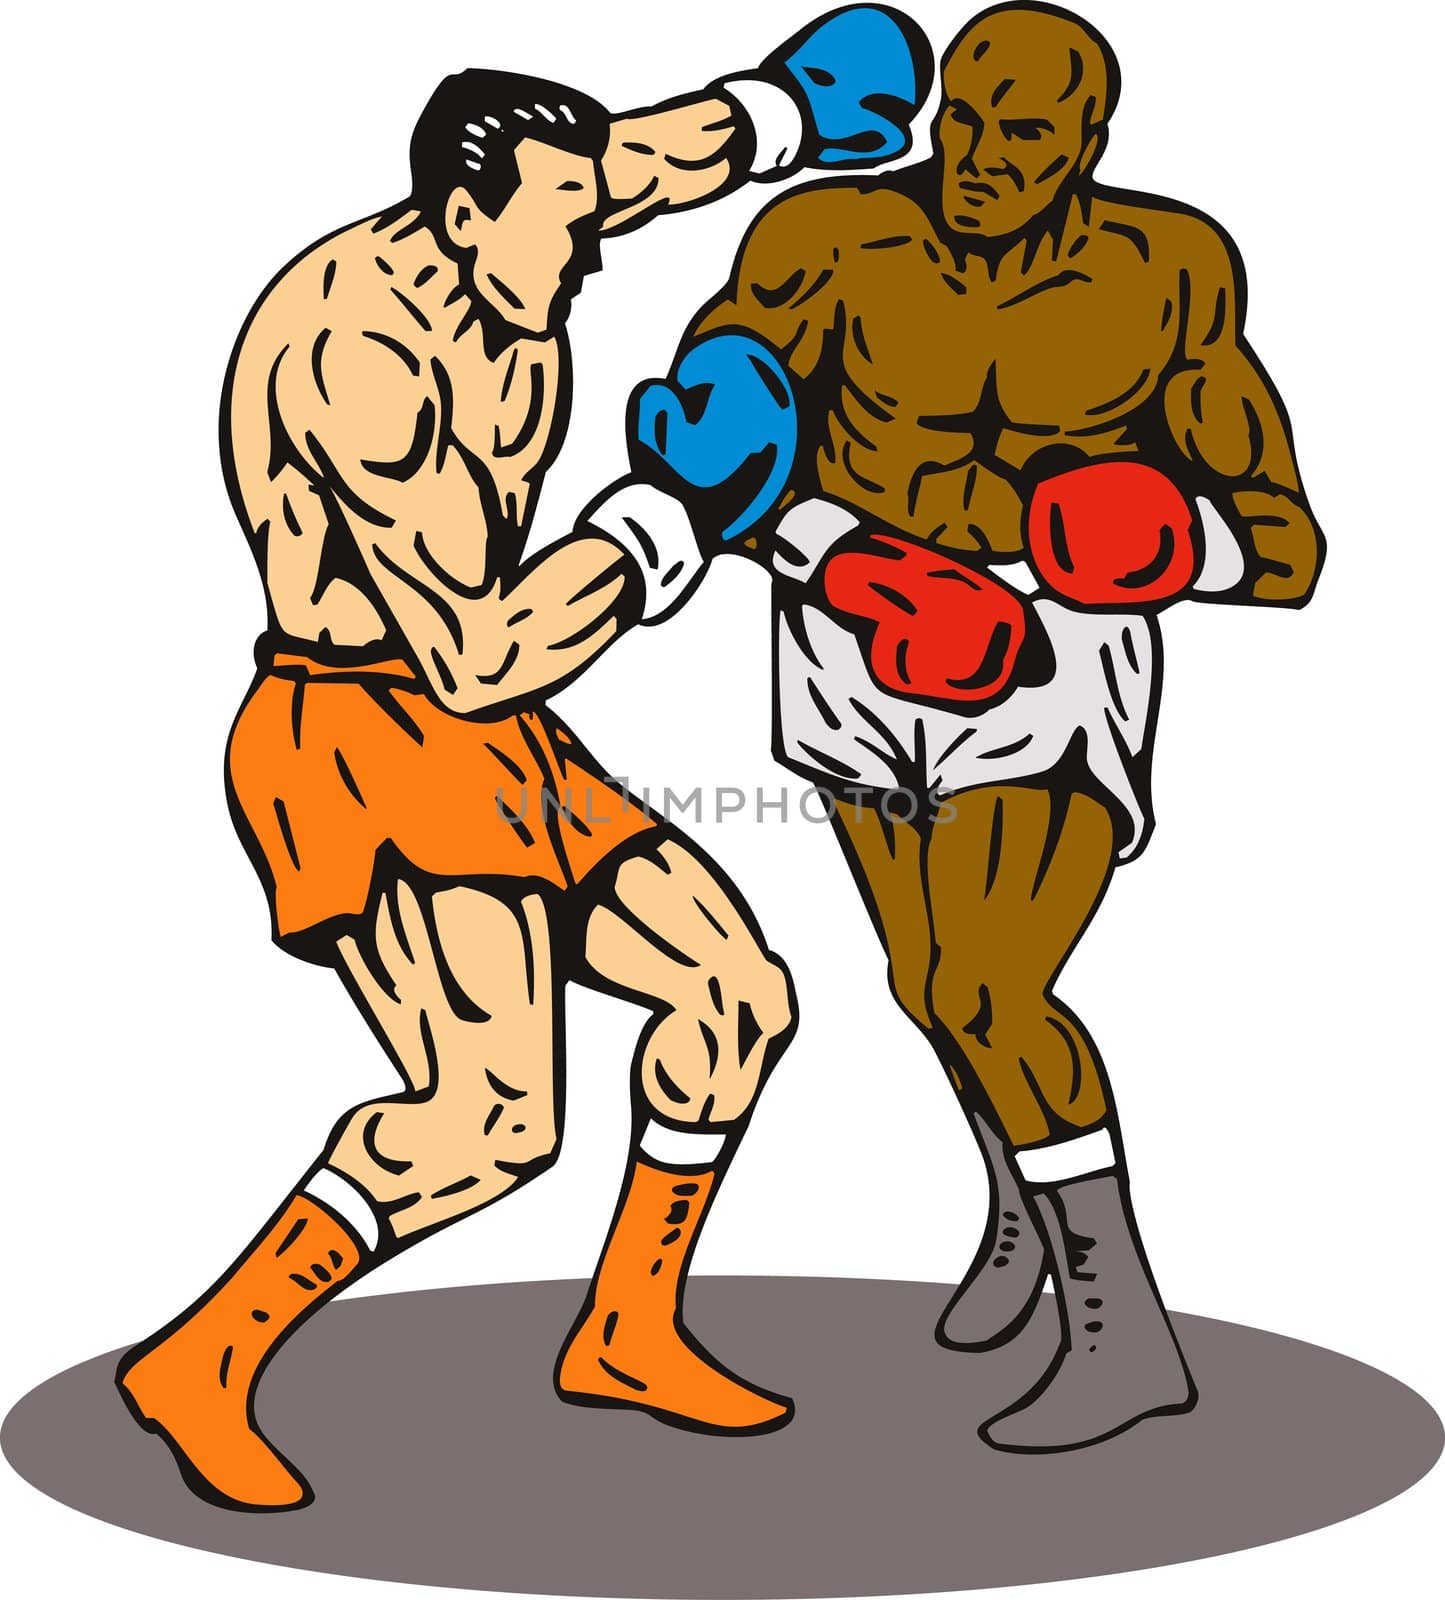 illustration of a boxer connecting a knockout punch retro style isolated on white